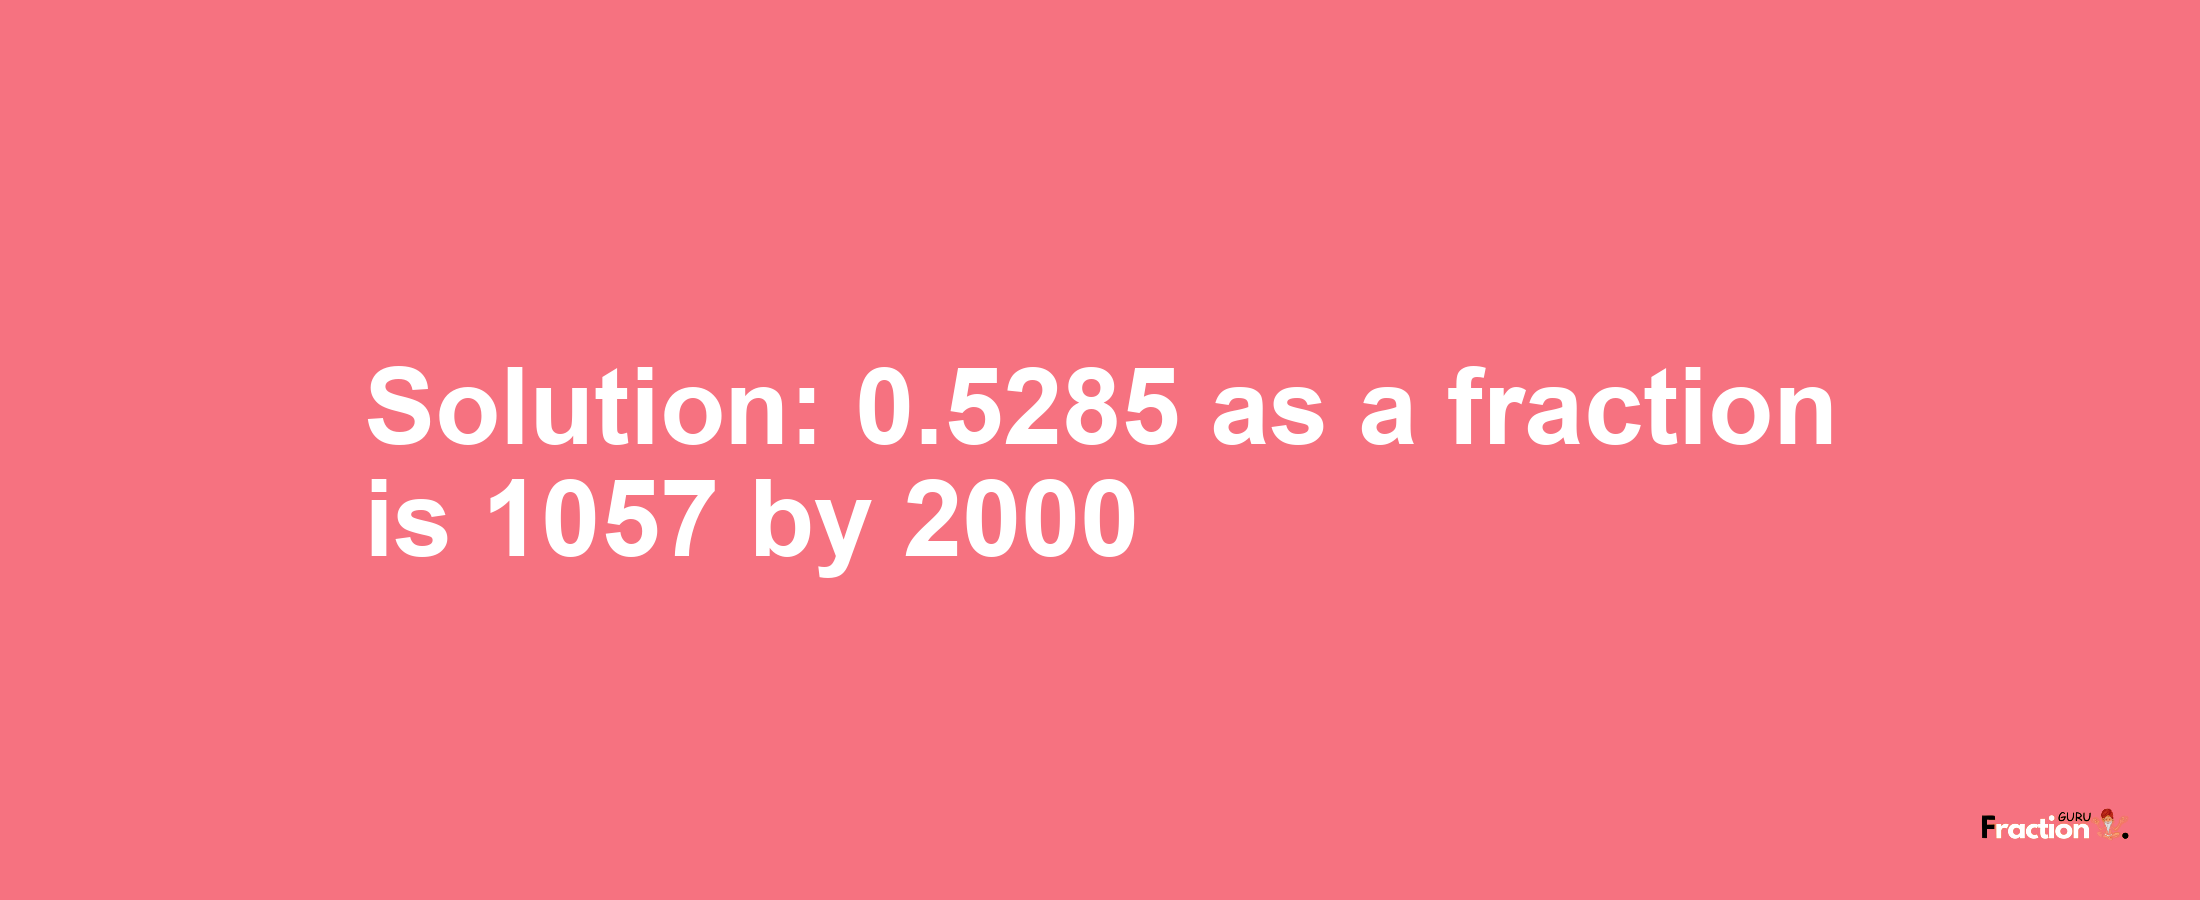 Solution:0.5285 as a fraction is 1057/2000